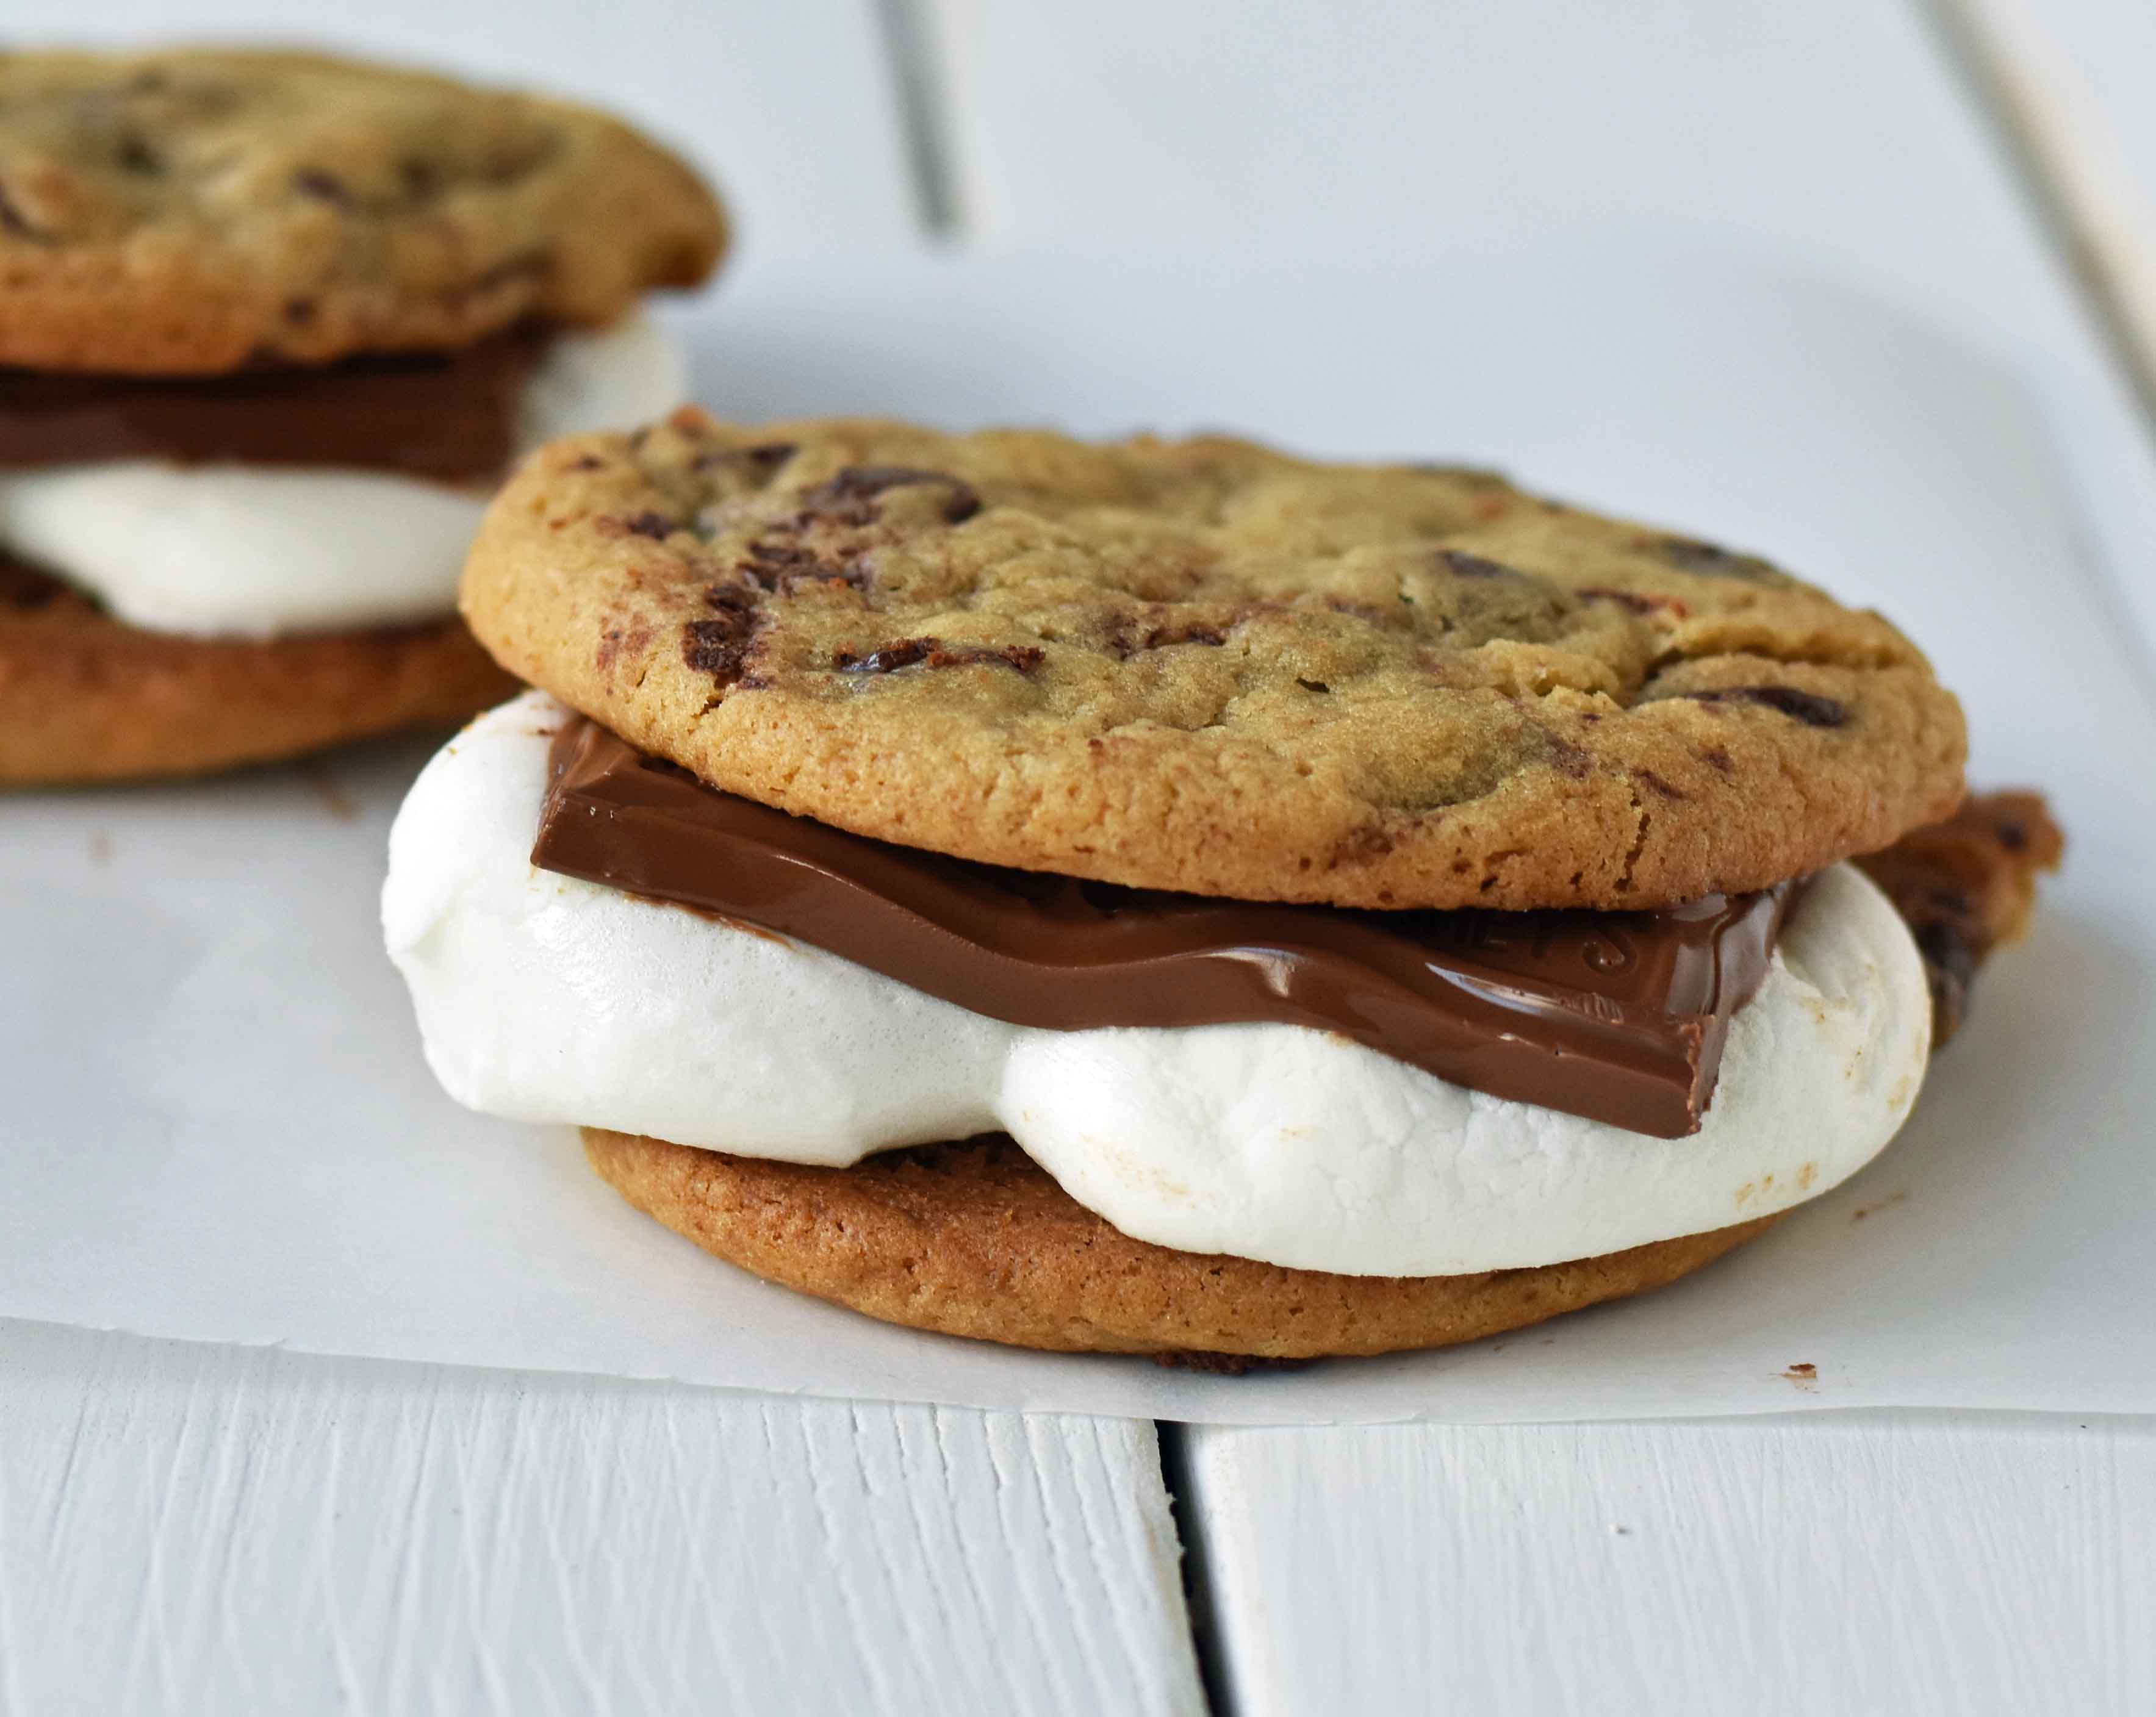 Chocolate Chip Cookie S'mores. Warm, homemade chocolate chip cookies sandwiched with melted toasted marshmallow and rich milk chocolate. The ultimate s'mores. www.modernhoney.com